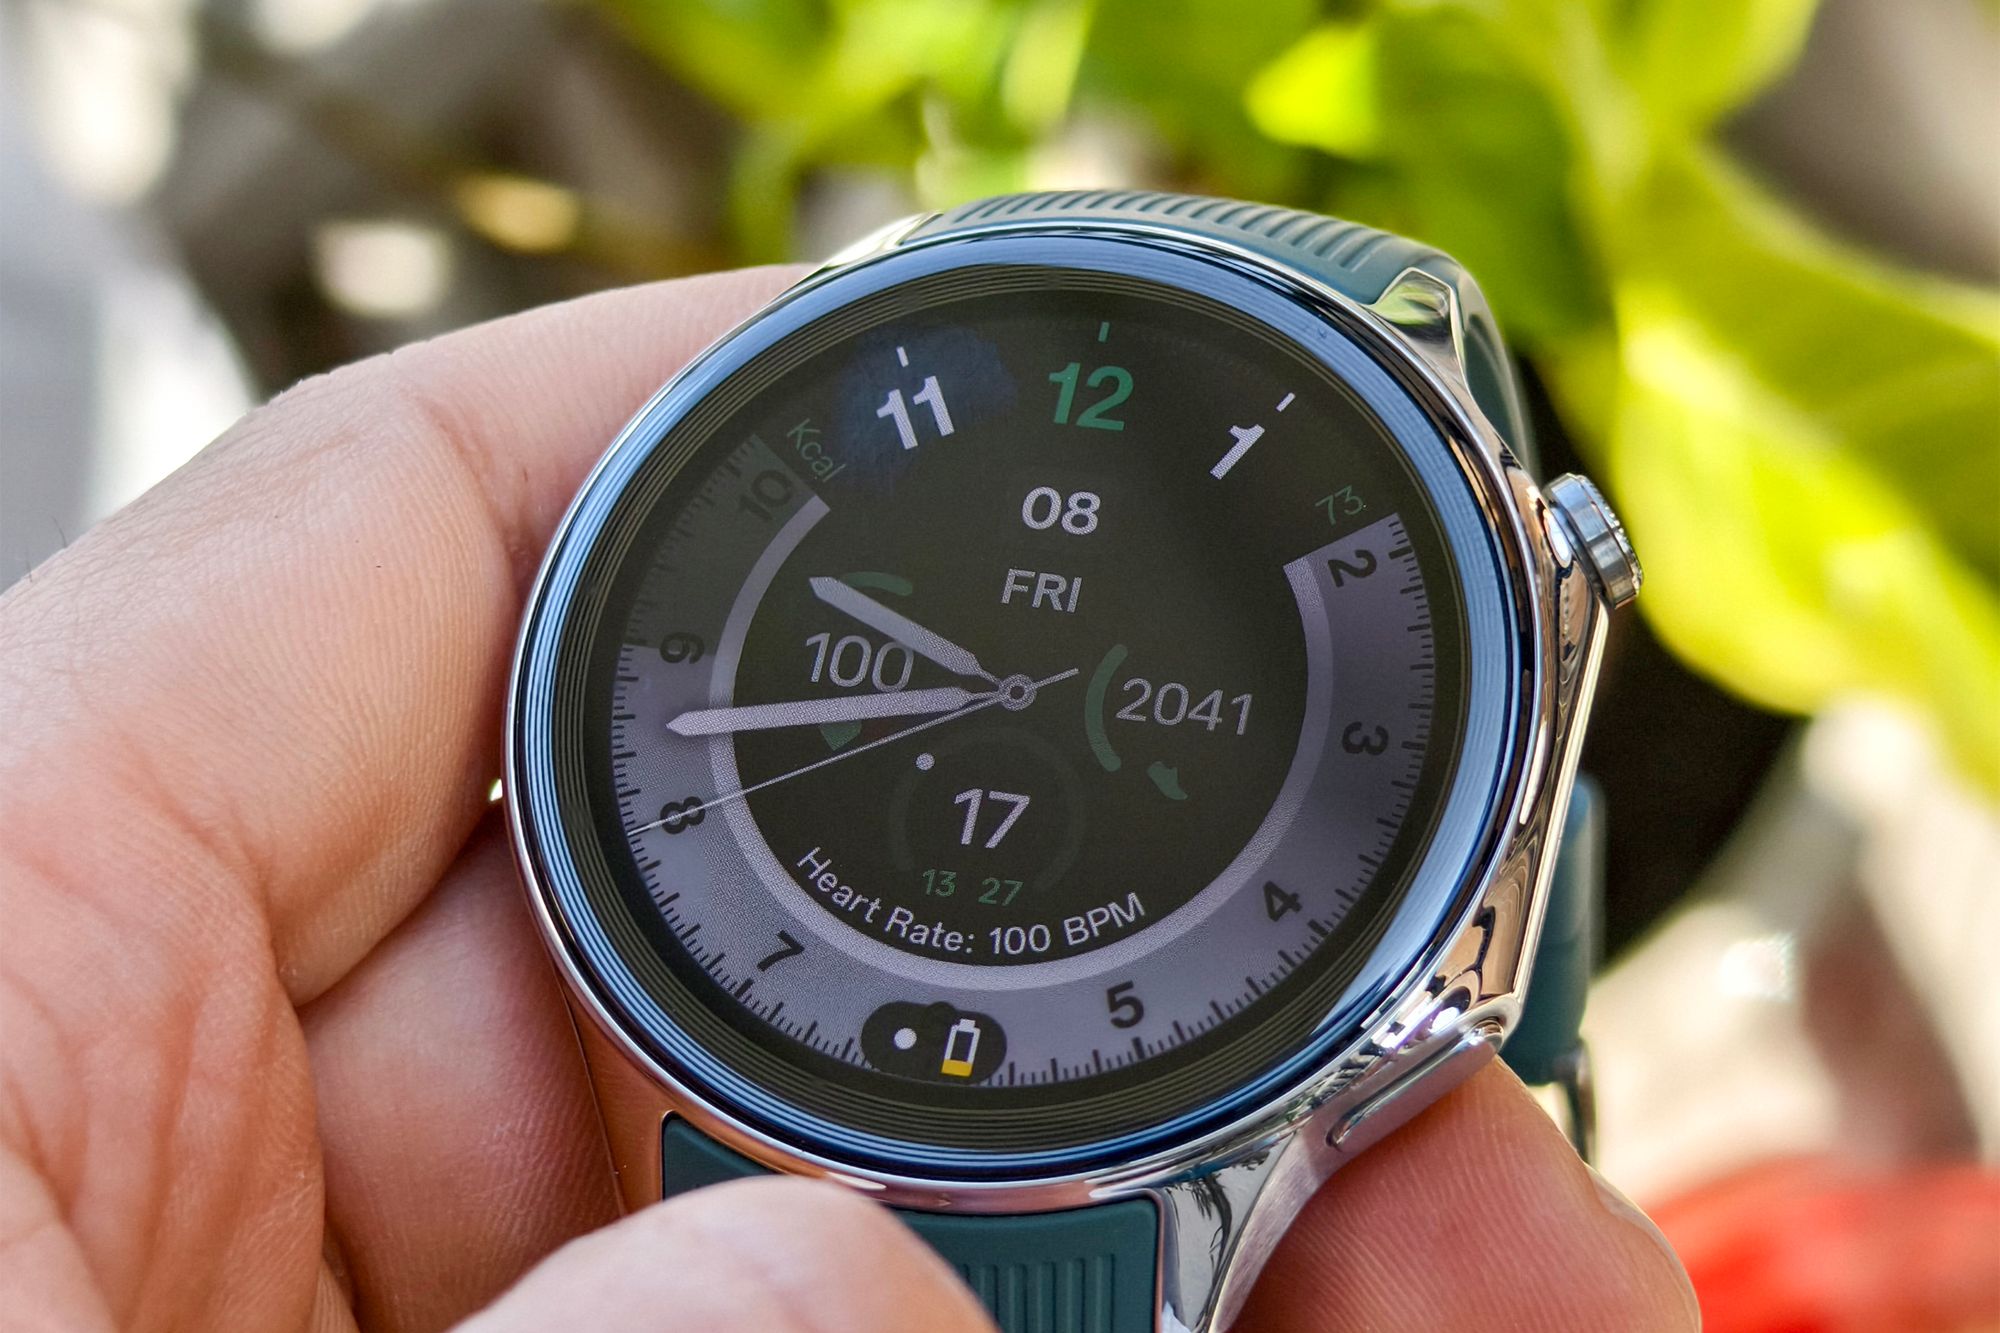 OnePlus Watch 2 Wear OS smartwatch with green rubber band